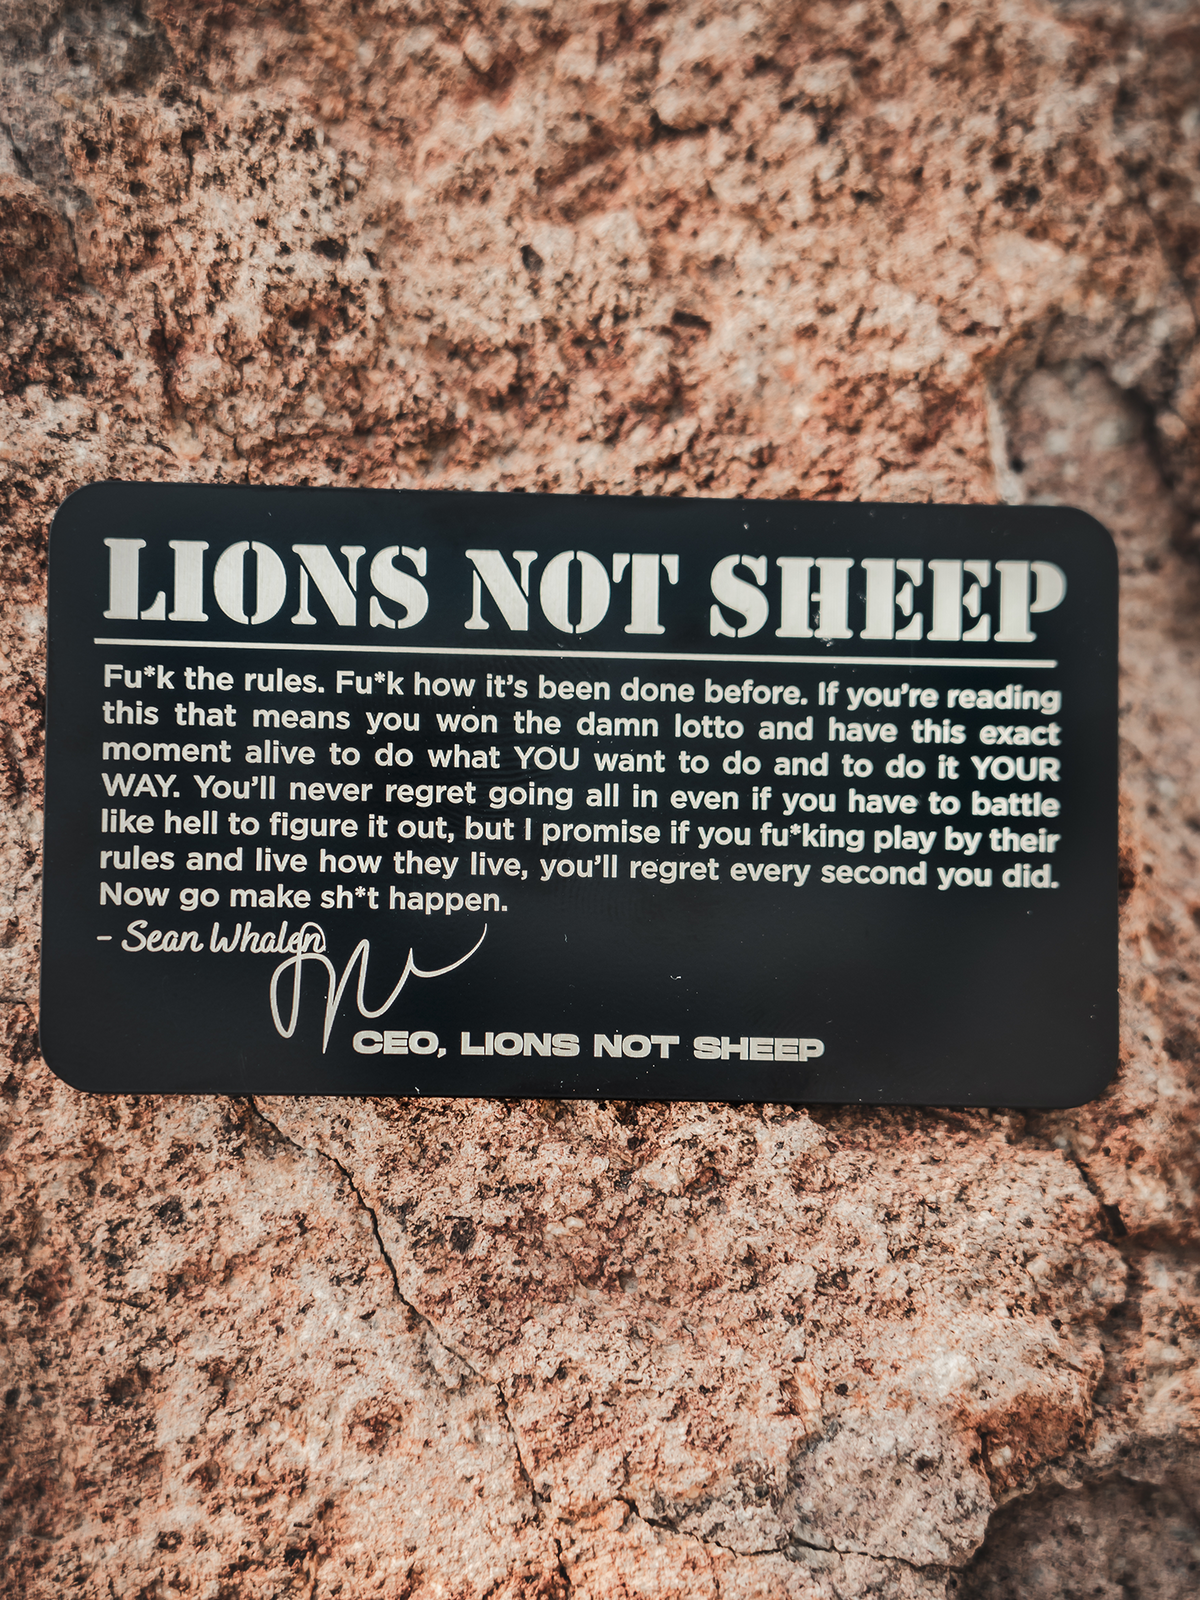 Lions Not Sheep Crest Seal Wallet - Lions Not Sheep ®